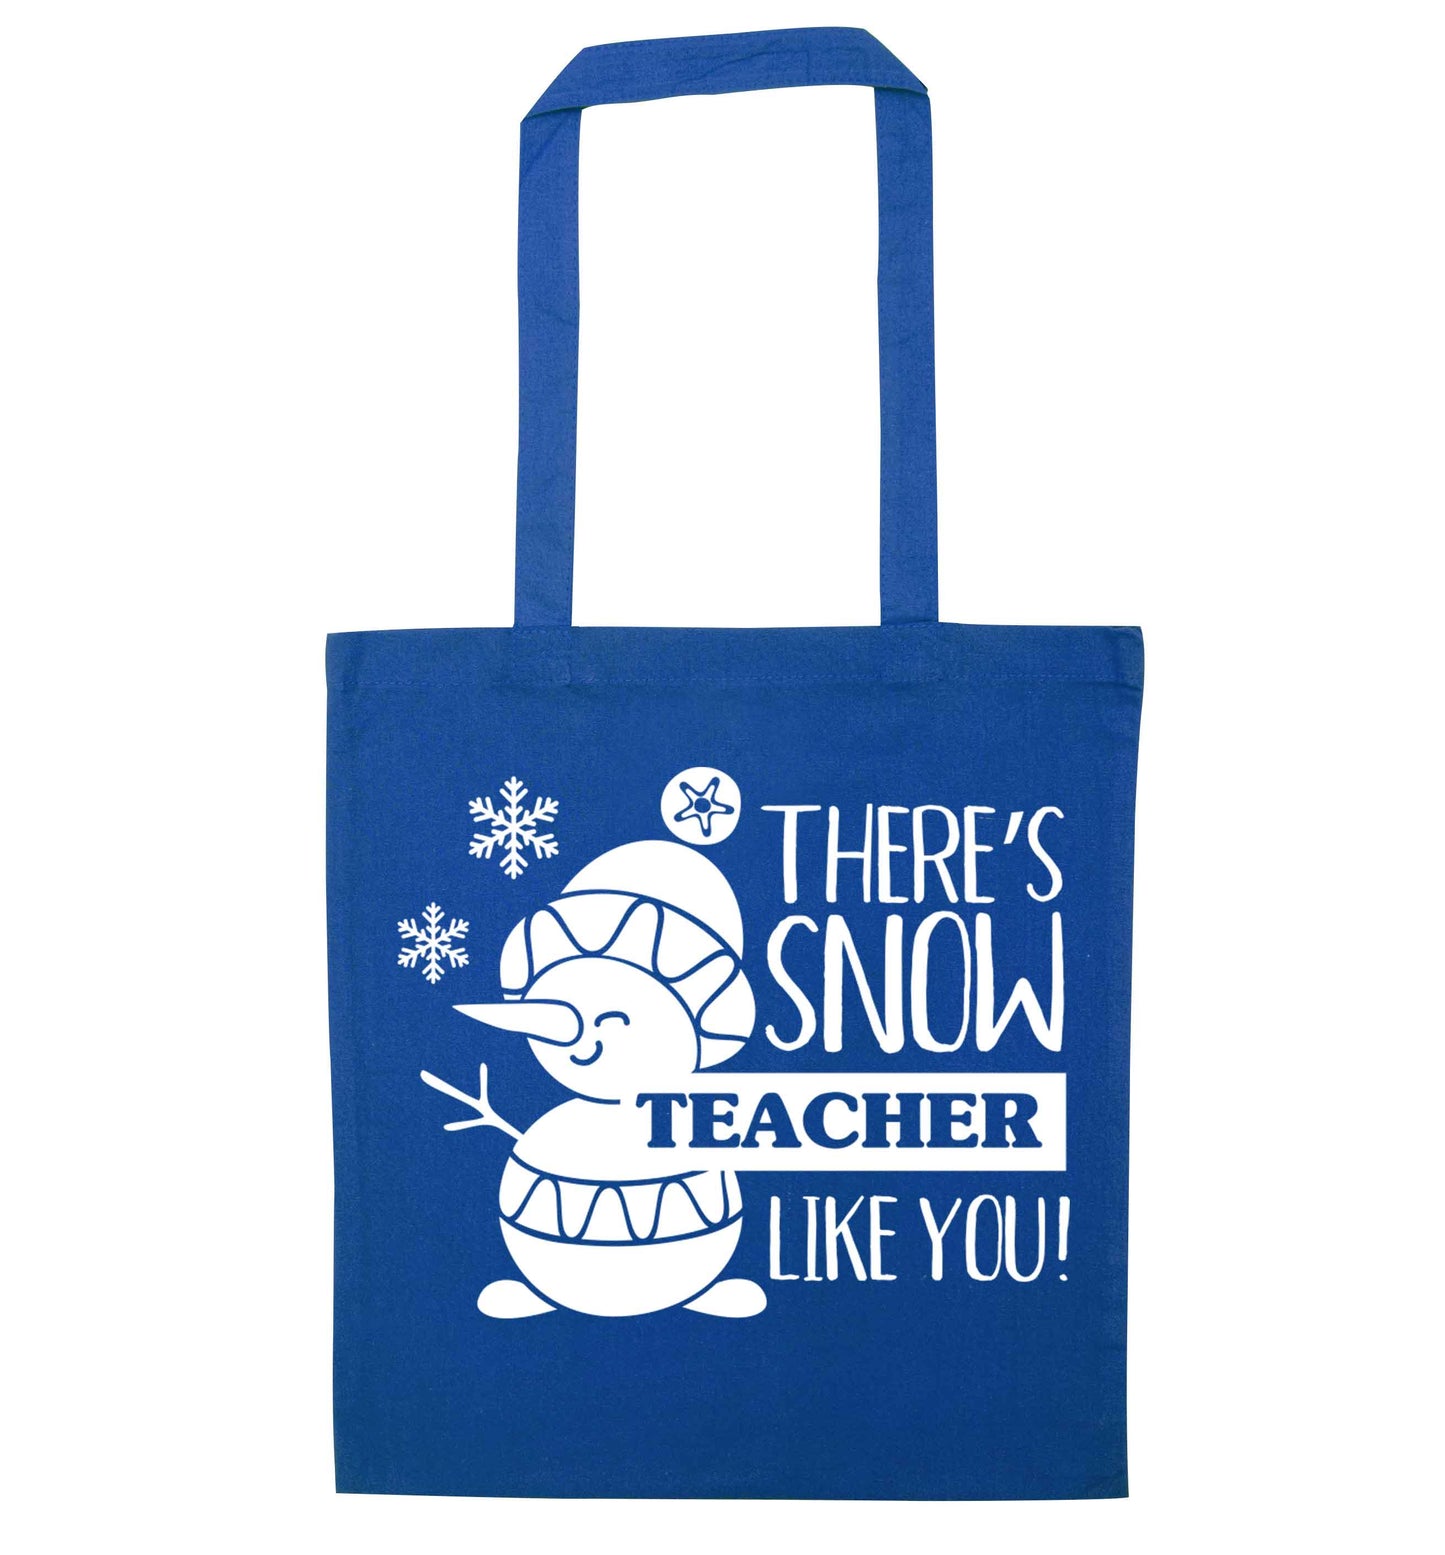 There's snow teacher like you blue tote bag